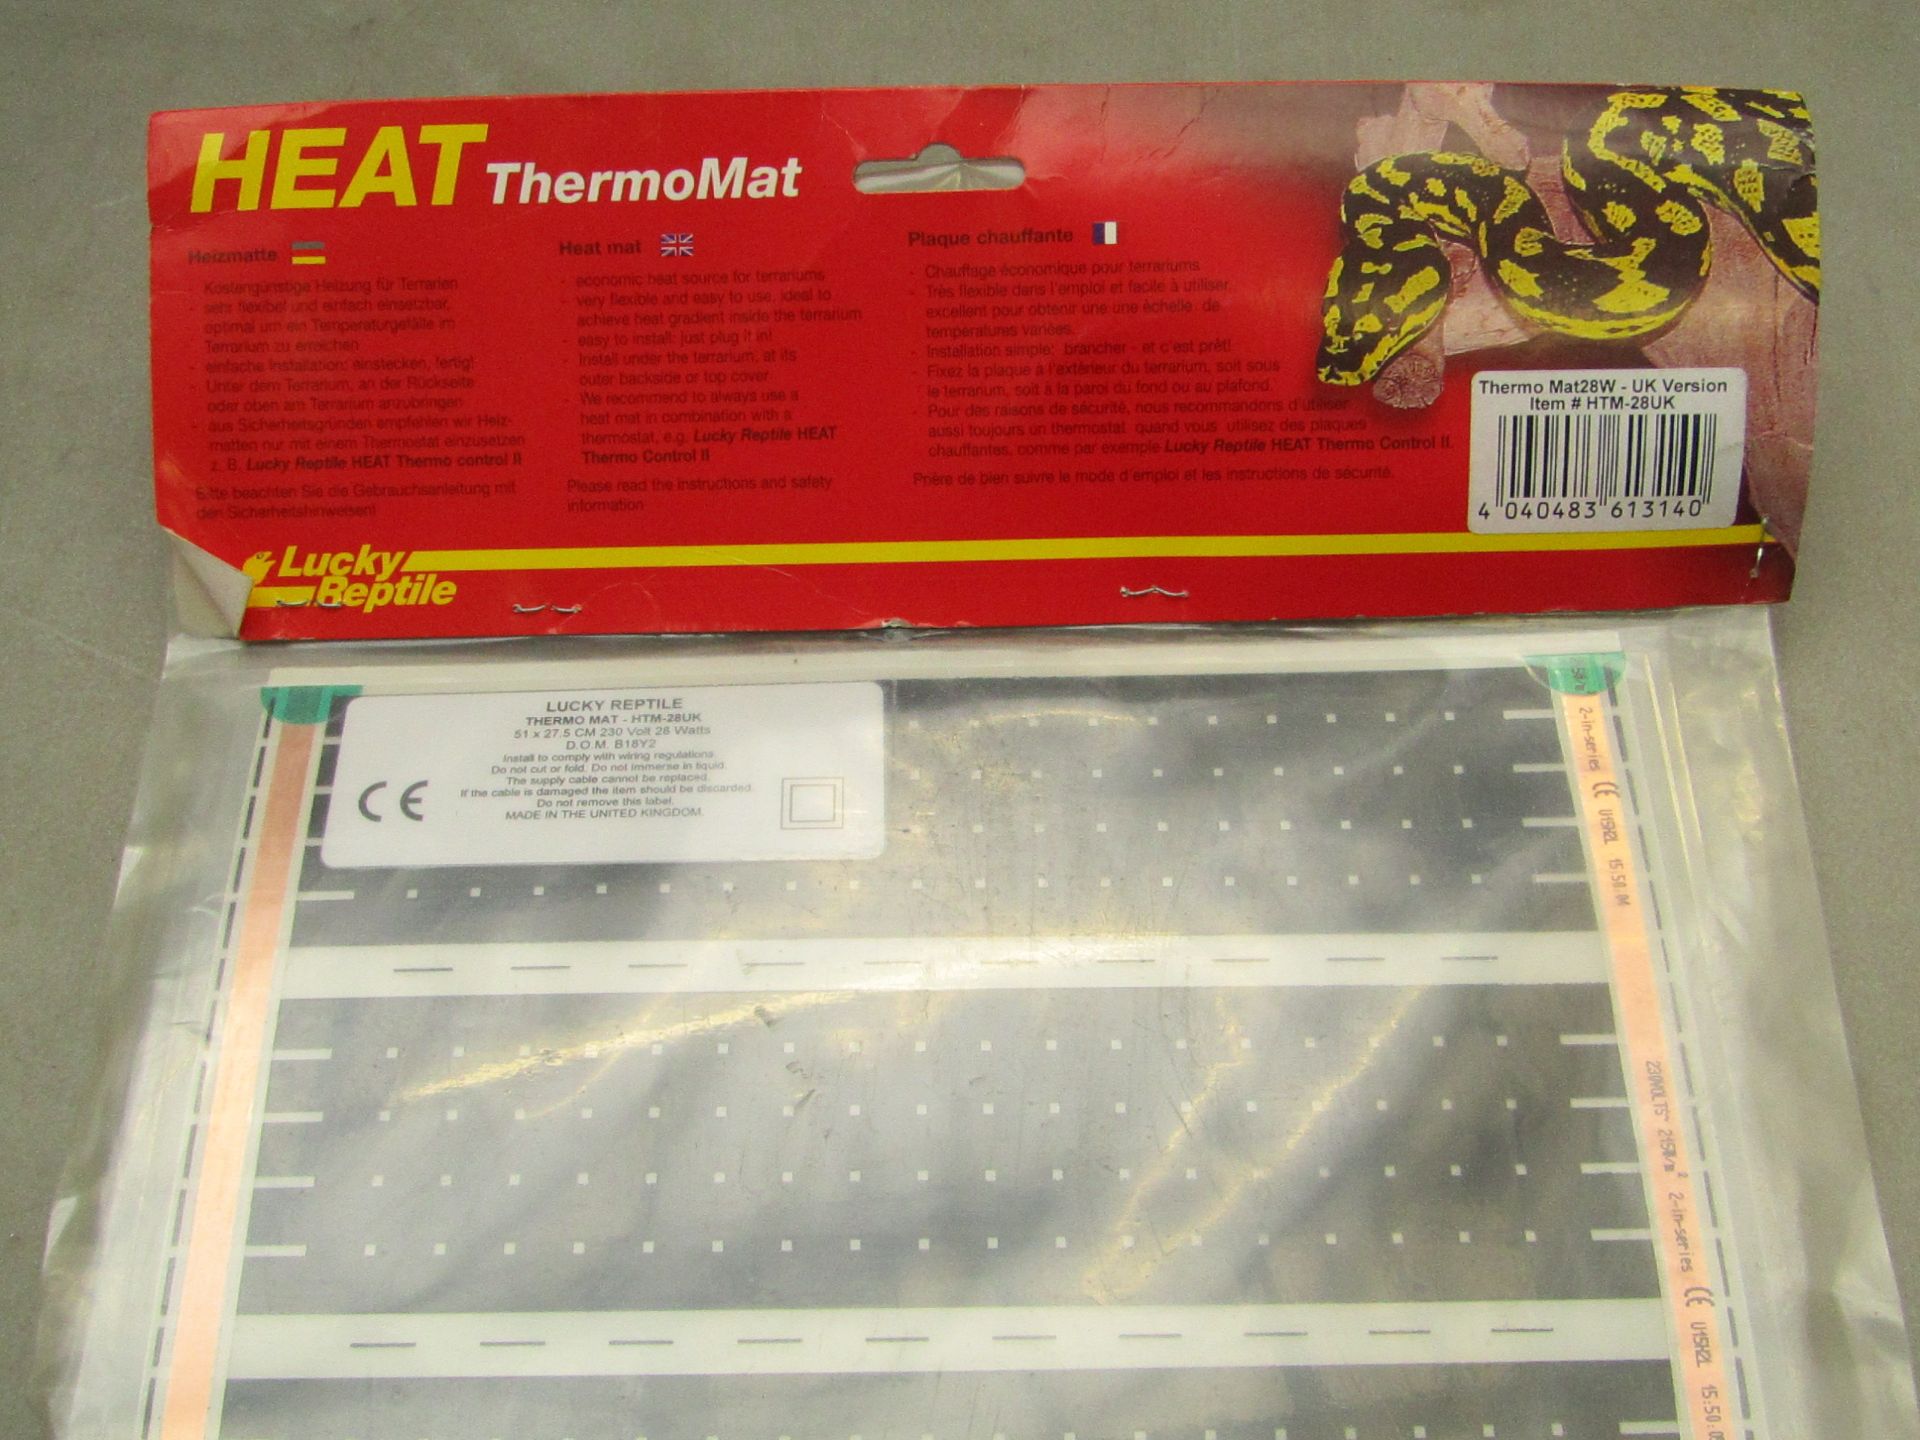 Lucky reptile heat thermo mat pro, new and packaged.